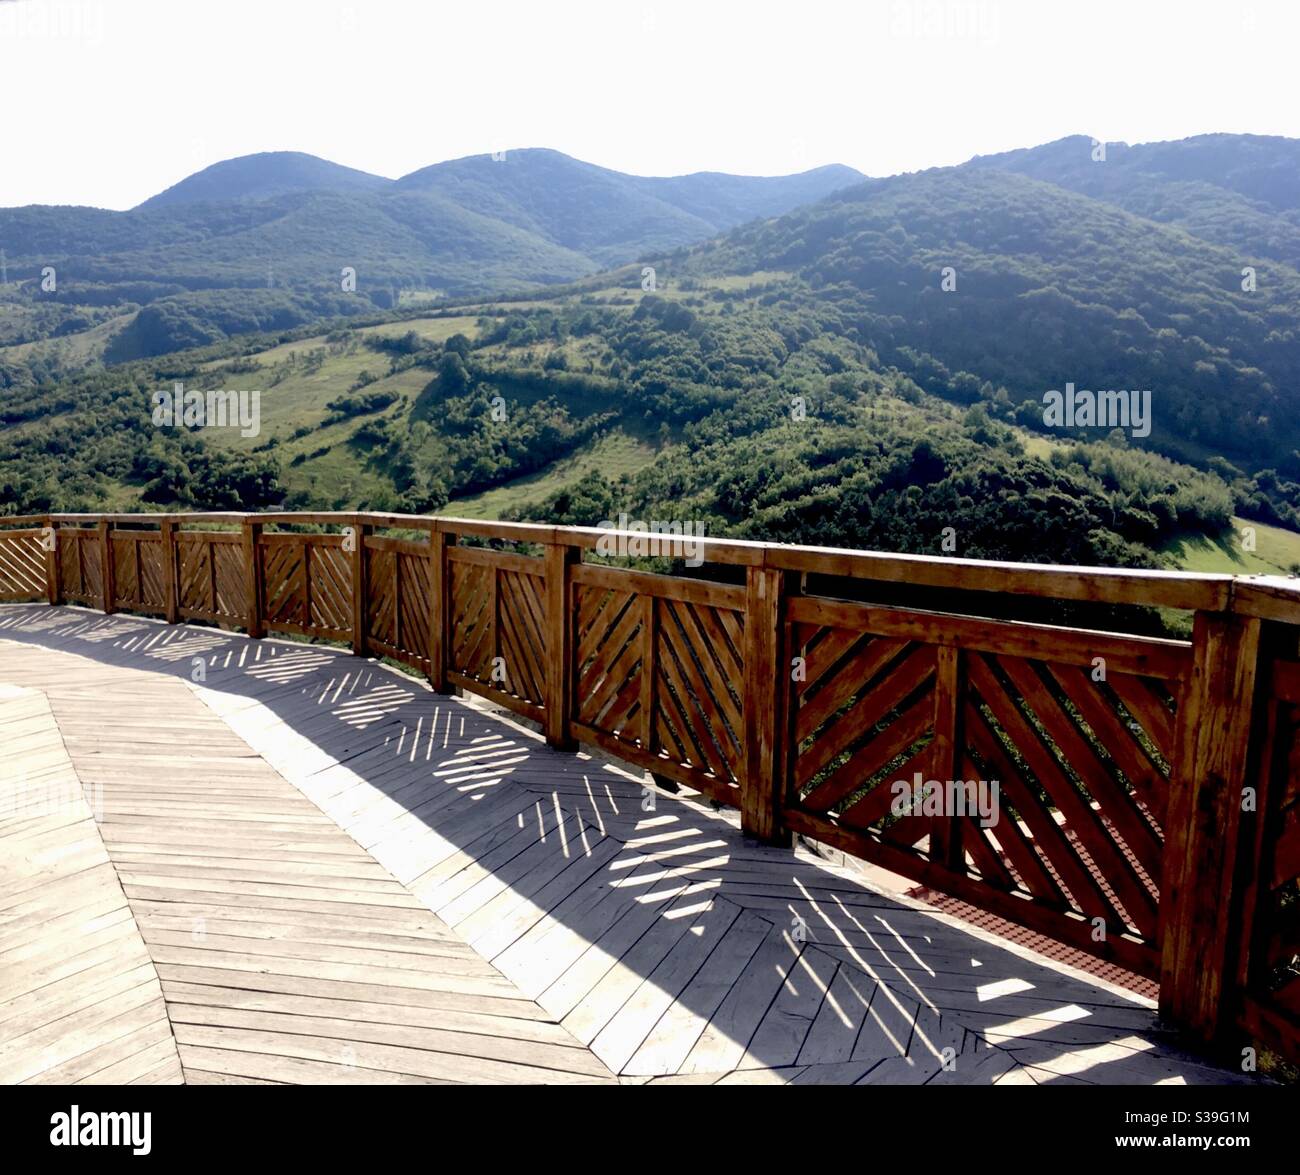 Wooden suspended platform near Deva Romania, with the Carpathian Mountains in the background Stock Photo